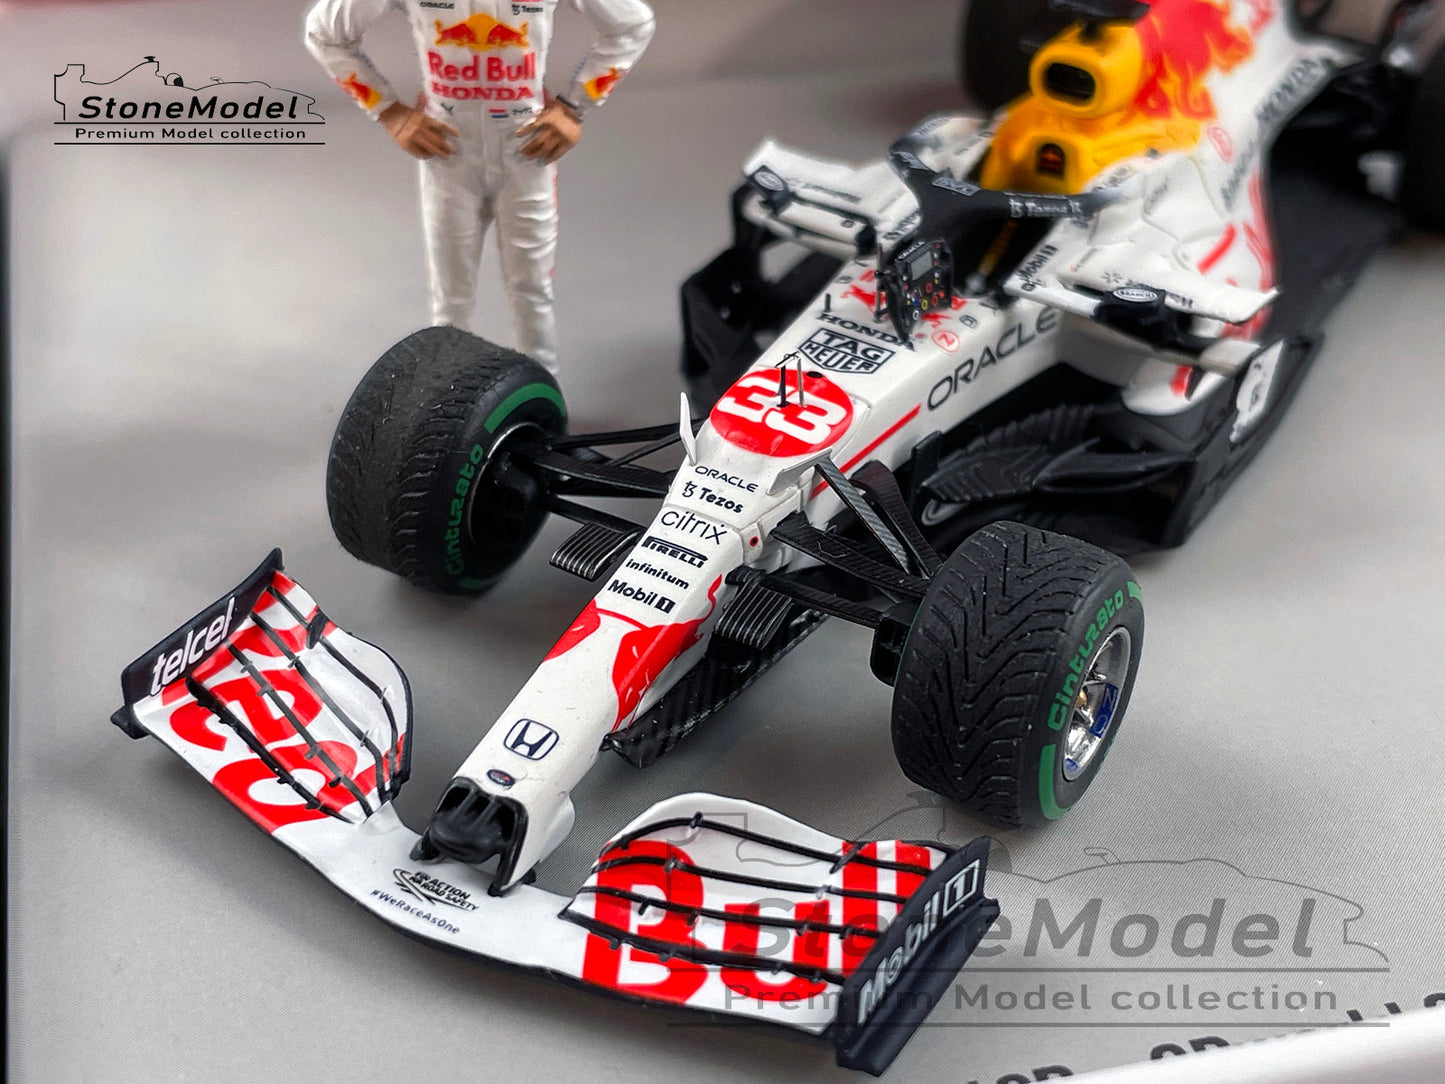 2021 F1 World Champion #33 Max Verstappen Red Bull RB16B Turkish GP Special Livery 1:43 Spark Figure Gift Box